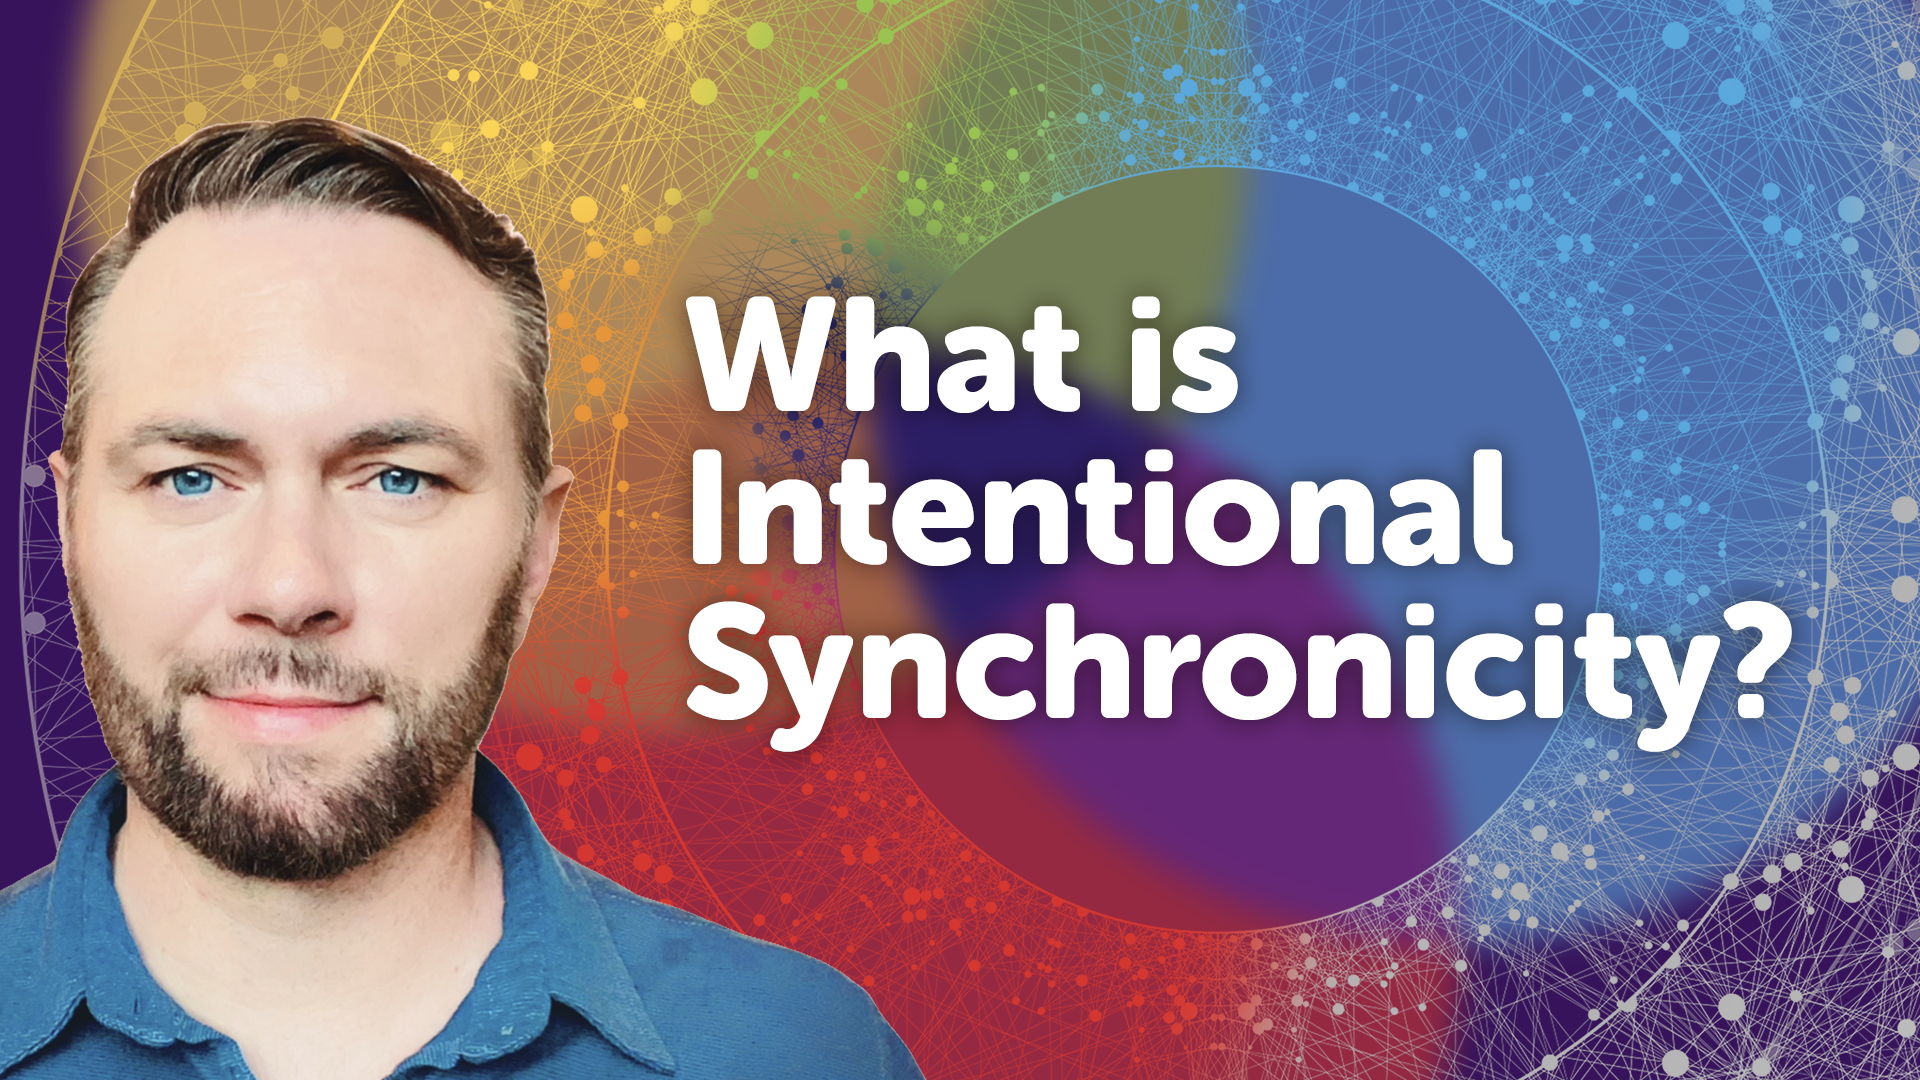 VIDEO – What is Intentional Synchronicity?